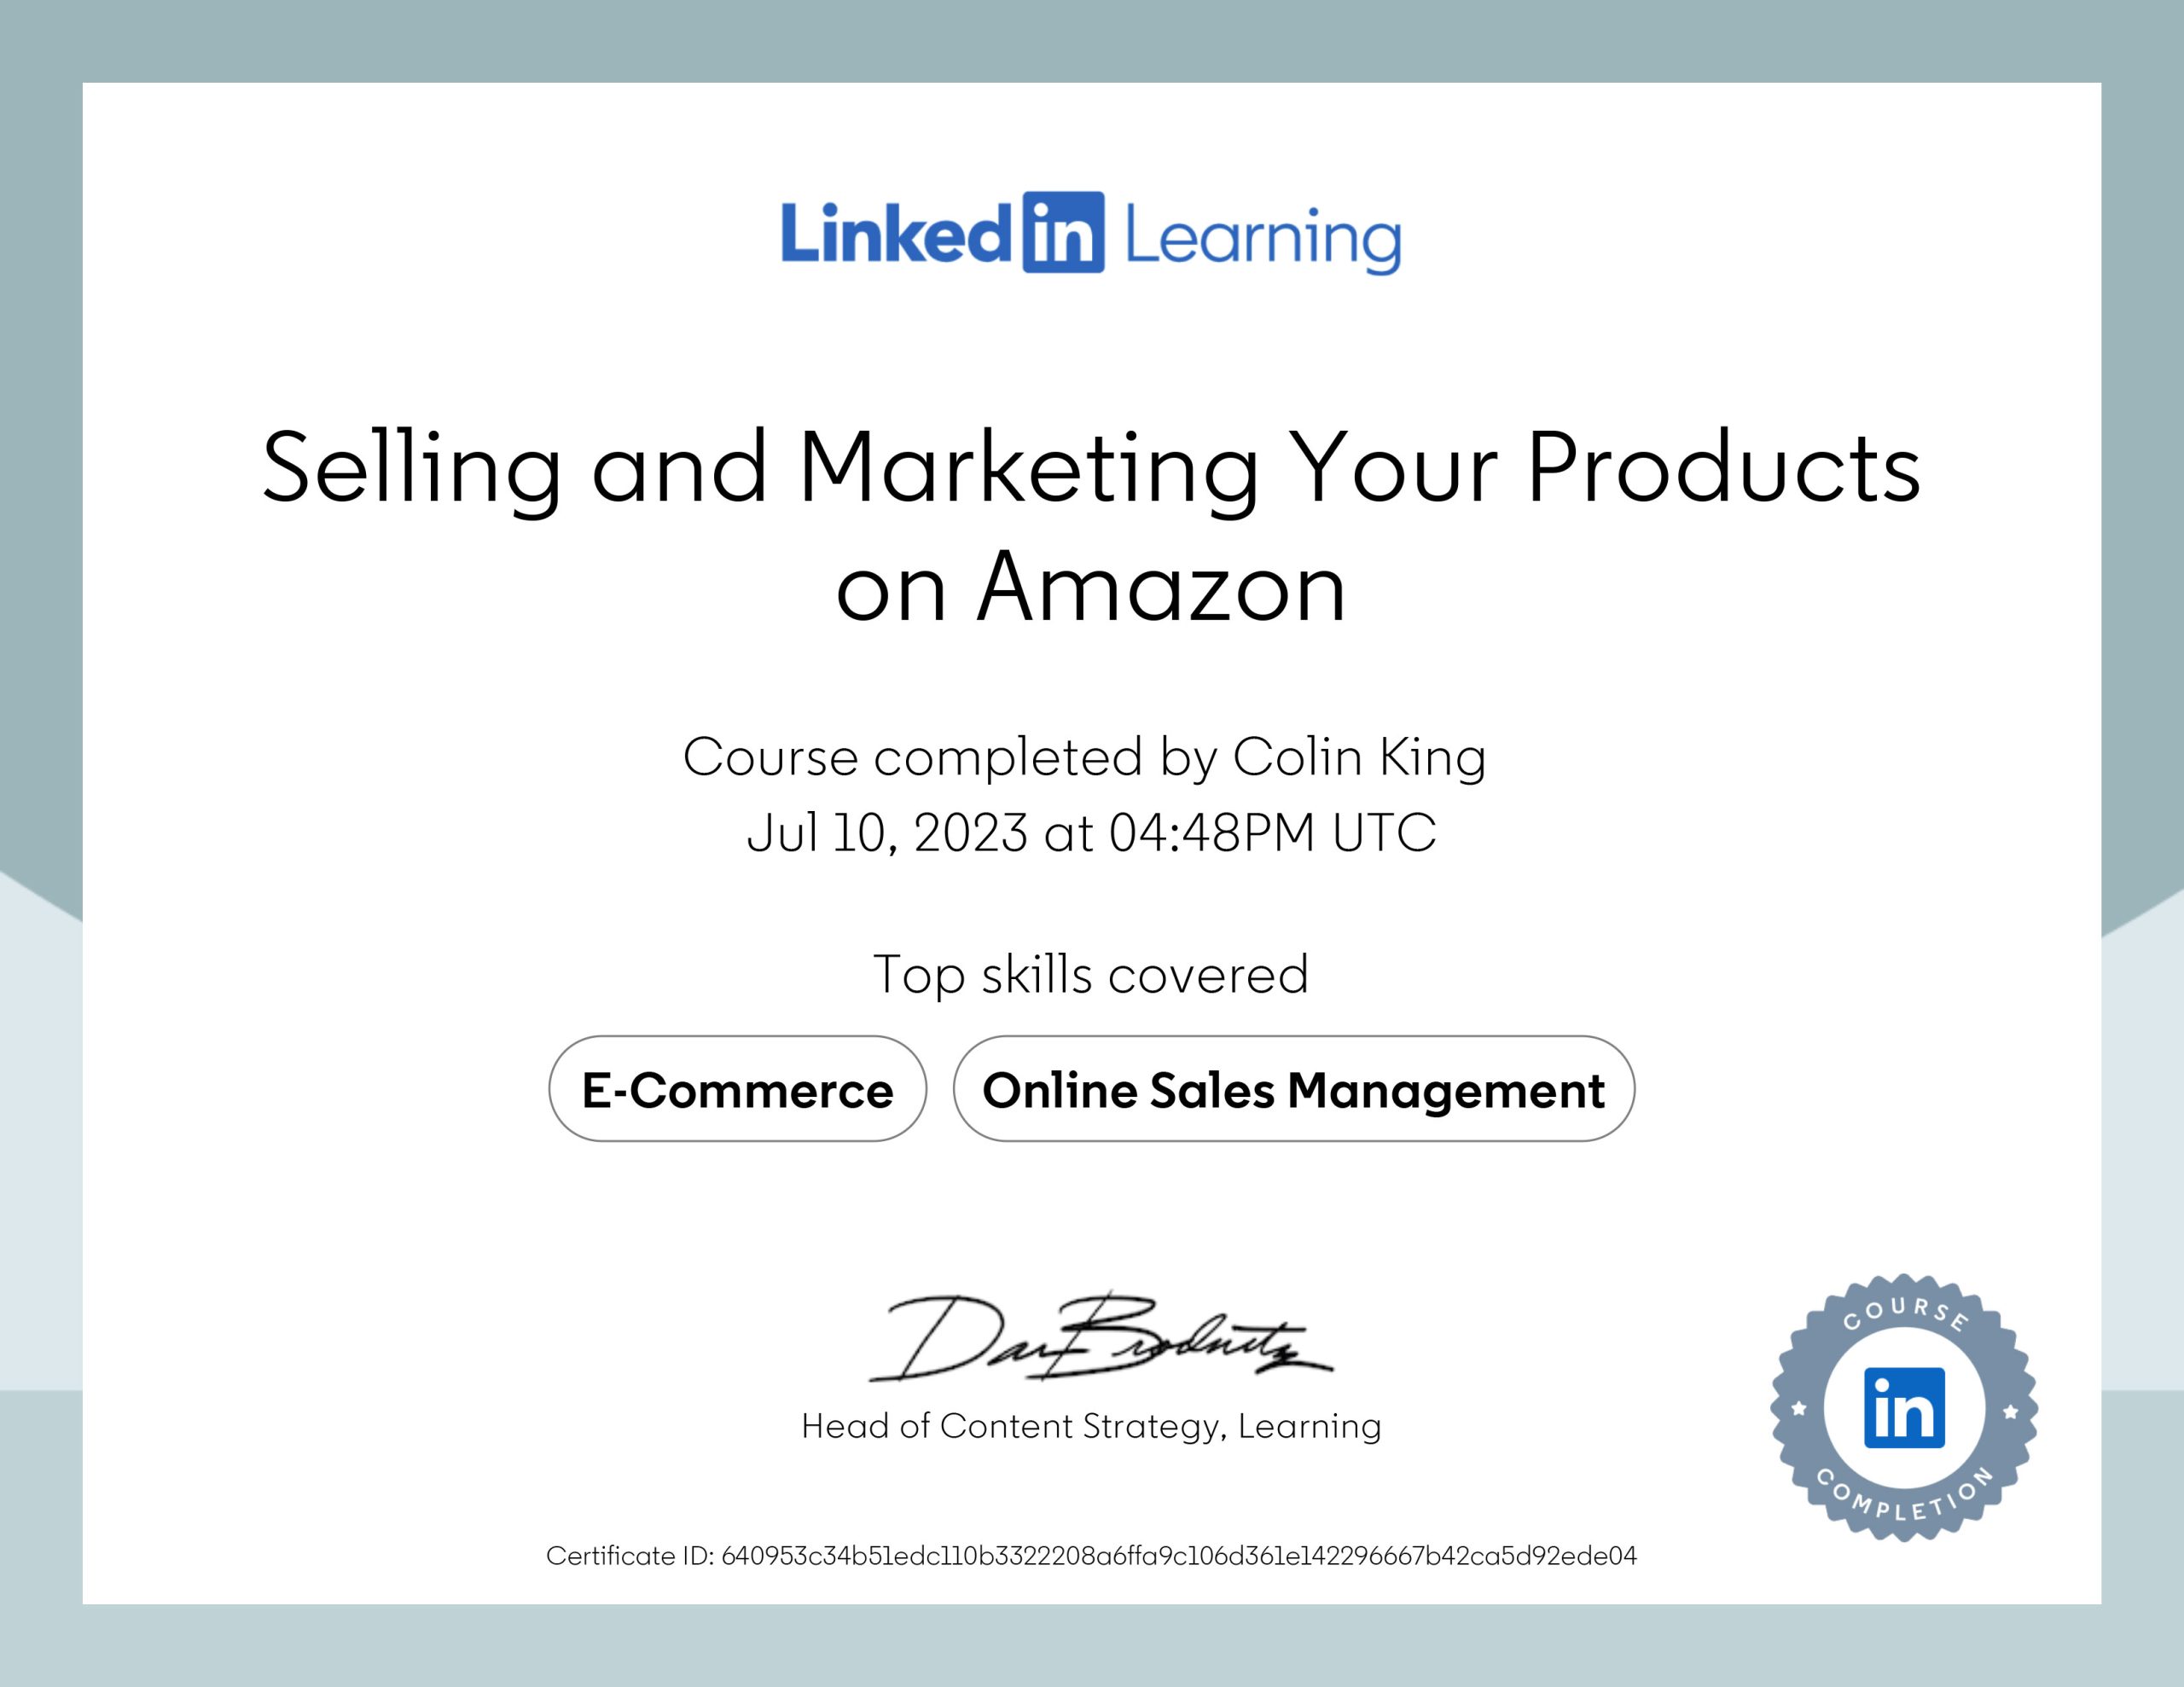 Certificate Of Completion Selling and Marketing Your Products on Amazon